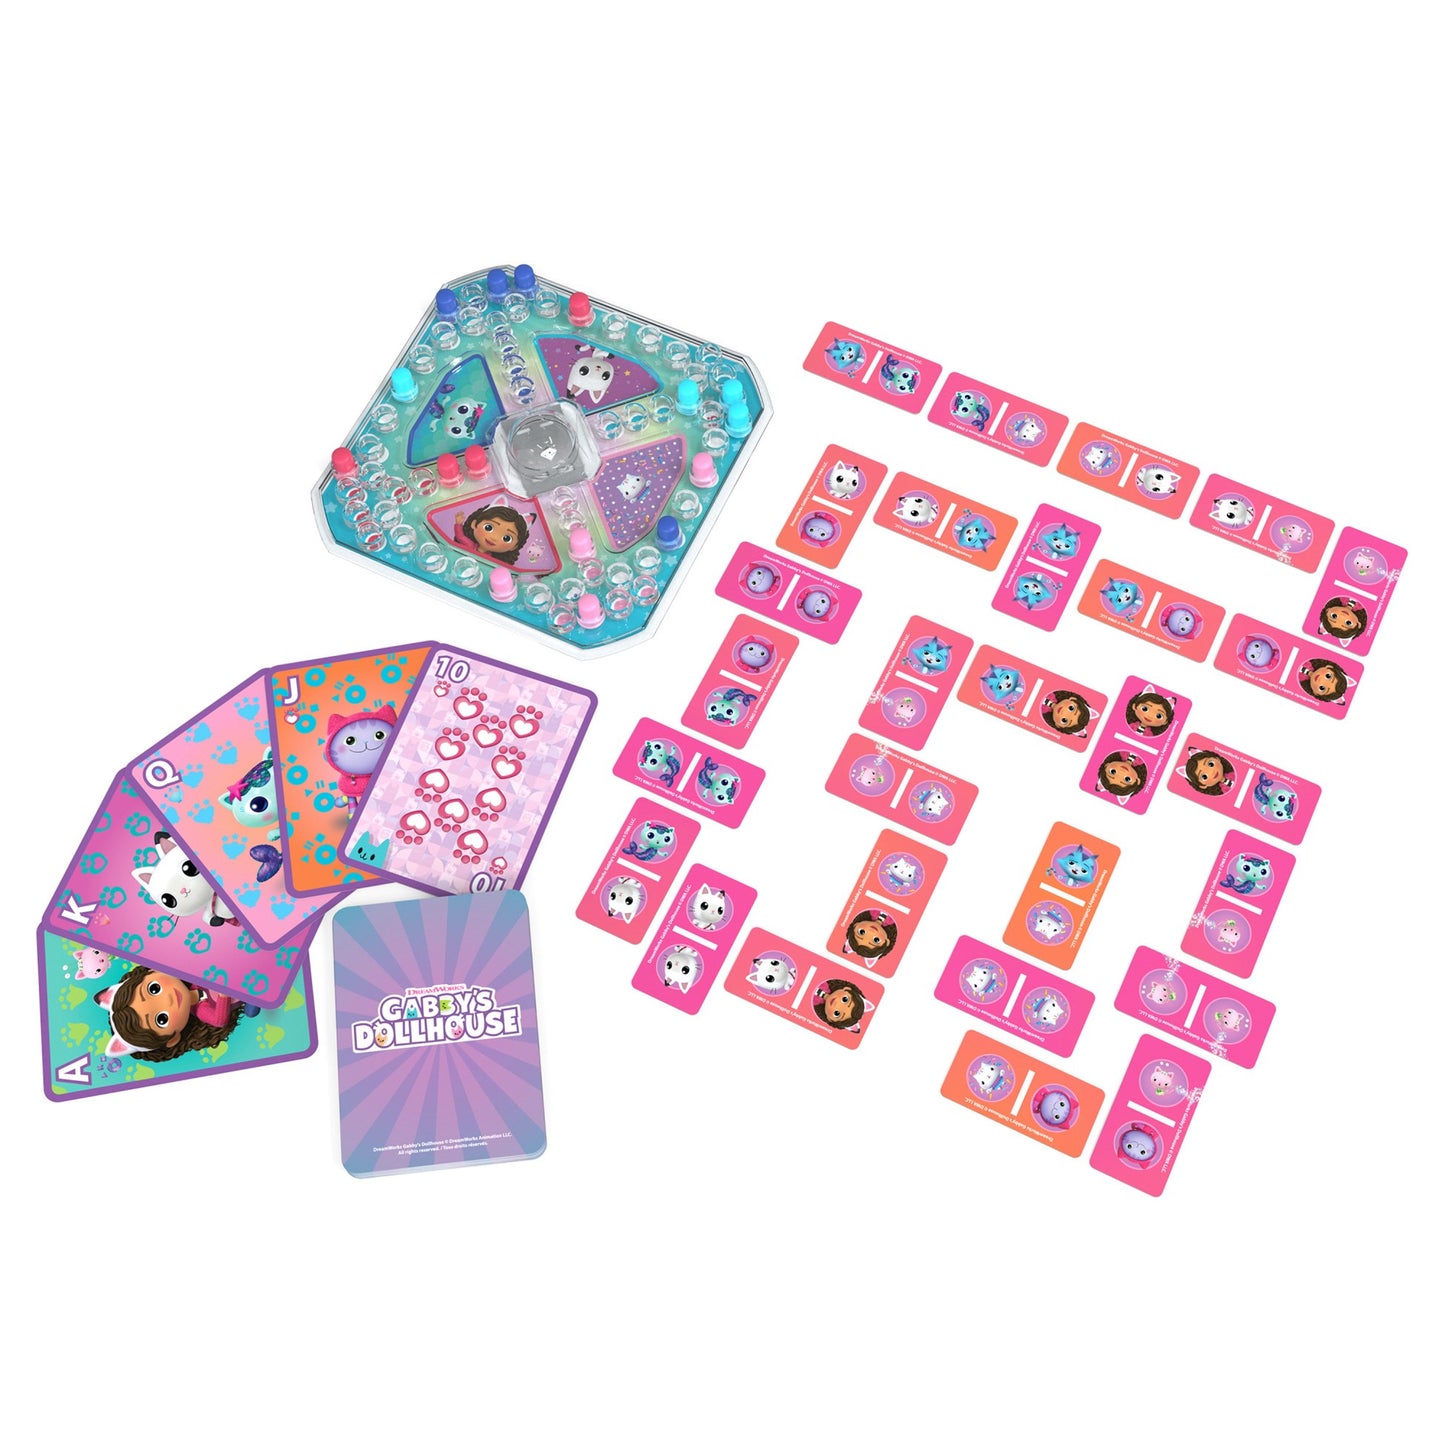 Gabby's Dollhouse 3 Game Bundle Gift Set, Pop-Up Game Dominoes Jumbo Playing Cards, Gabby's Dollhouse Toys Kids Games